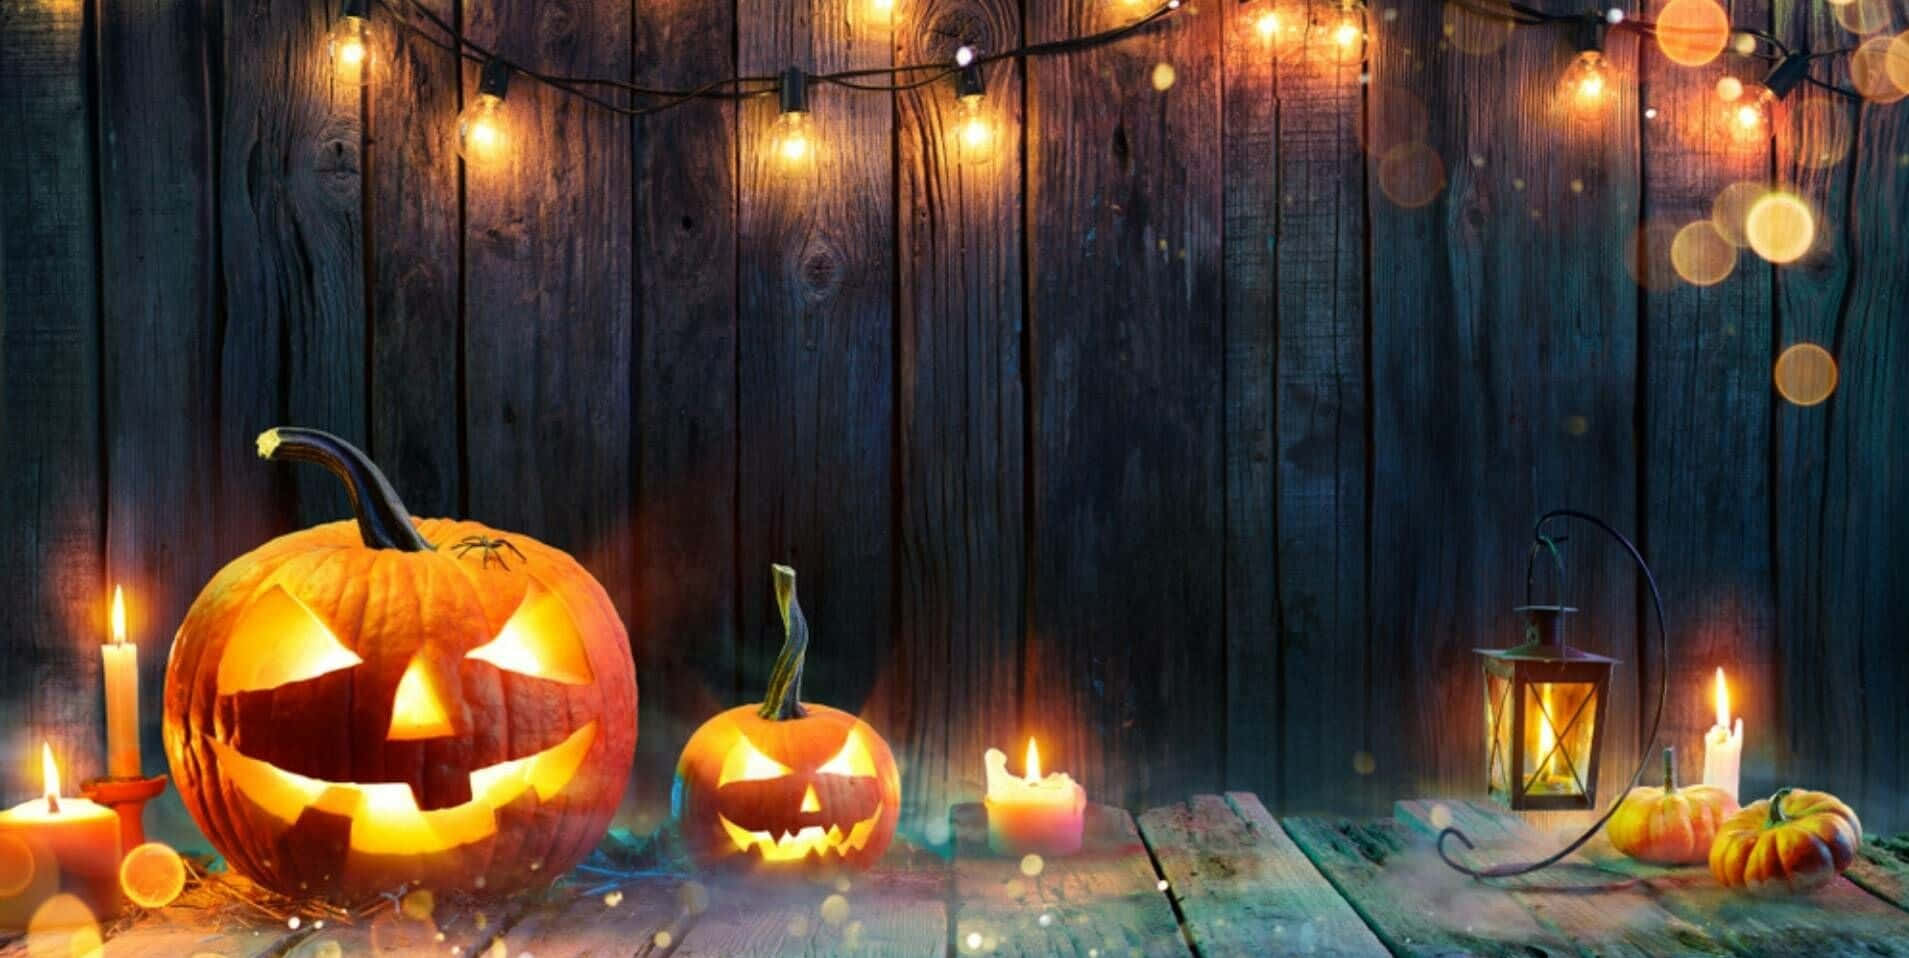 Halloween Pumpkins And Candles On A Wooden Background